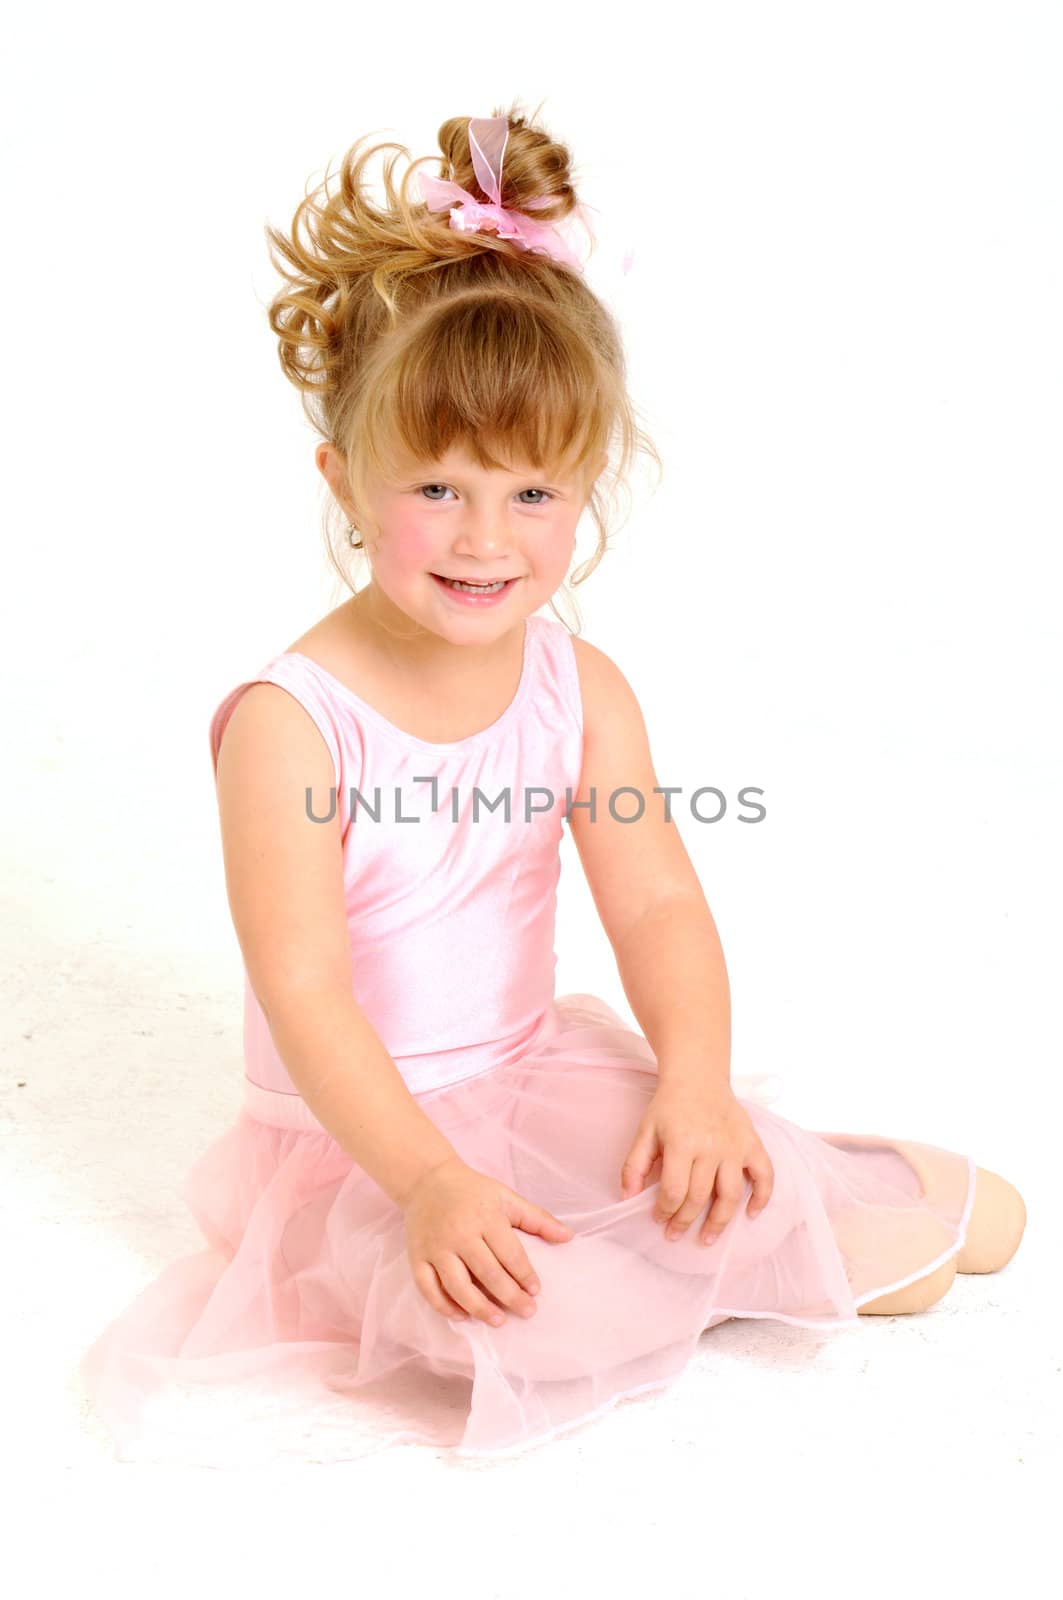 Little smiley girl wearing a pink ballet outfit is sitting on the floor